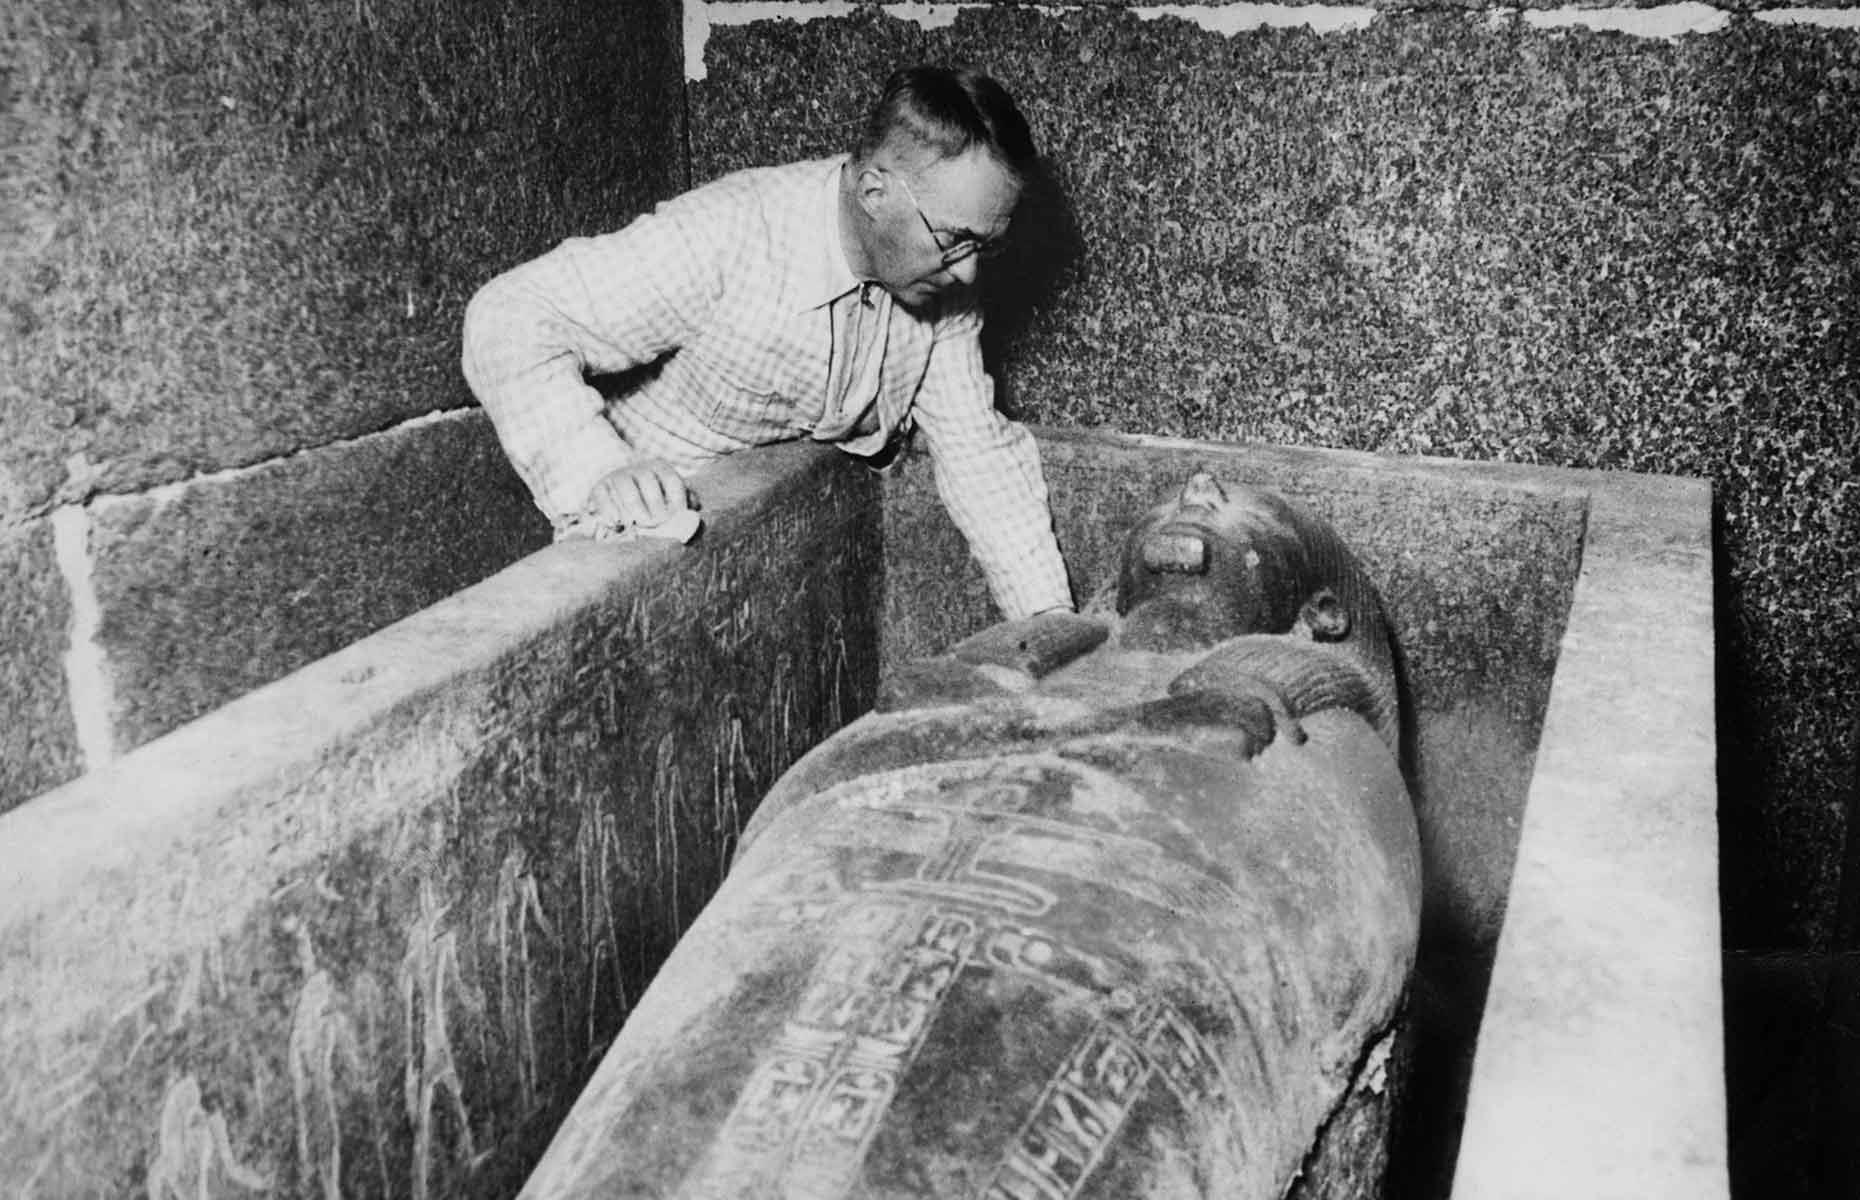 <p>In 1939, French Egyptologist Pierre Montet discovered the royal necropolis of Tanis. The underground site was almost completely untouched, which was hugely significant as <a href="https://www.thecollector.com/ancient-egypt-only-intact-egyptian-pharaohs-tombs-ever-discovered/">not a single intact royal tomb had been found</a> in Egypt until Montet's find. Kings and princes from the 21st and 22nd Dynasties were buried in the necropolis complete with stone sarcophagi, silver coffins and copious amounts of gold and silver. Dubbed the Tanis Treasures, Montet's discovery was just as remarkable as Howard Carter's Tutankhamun find.</p>